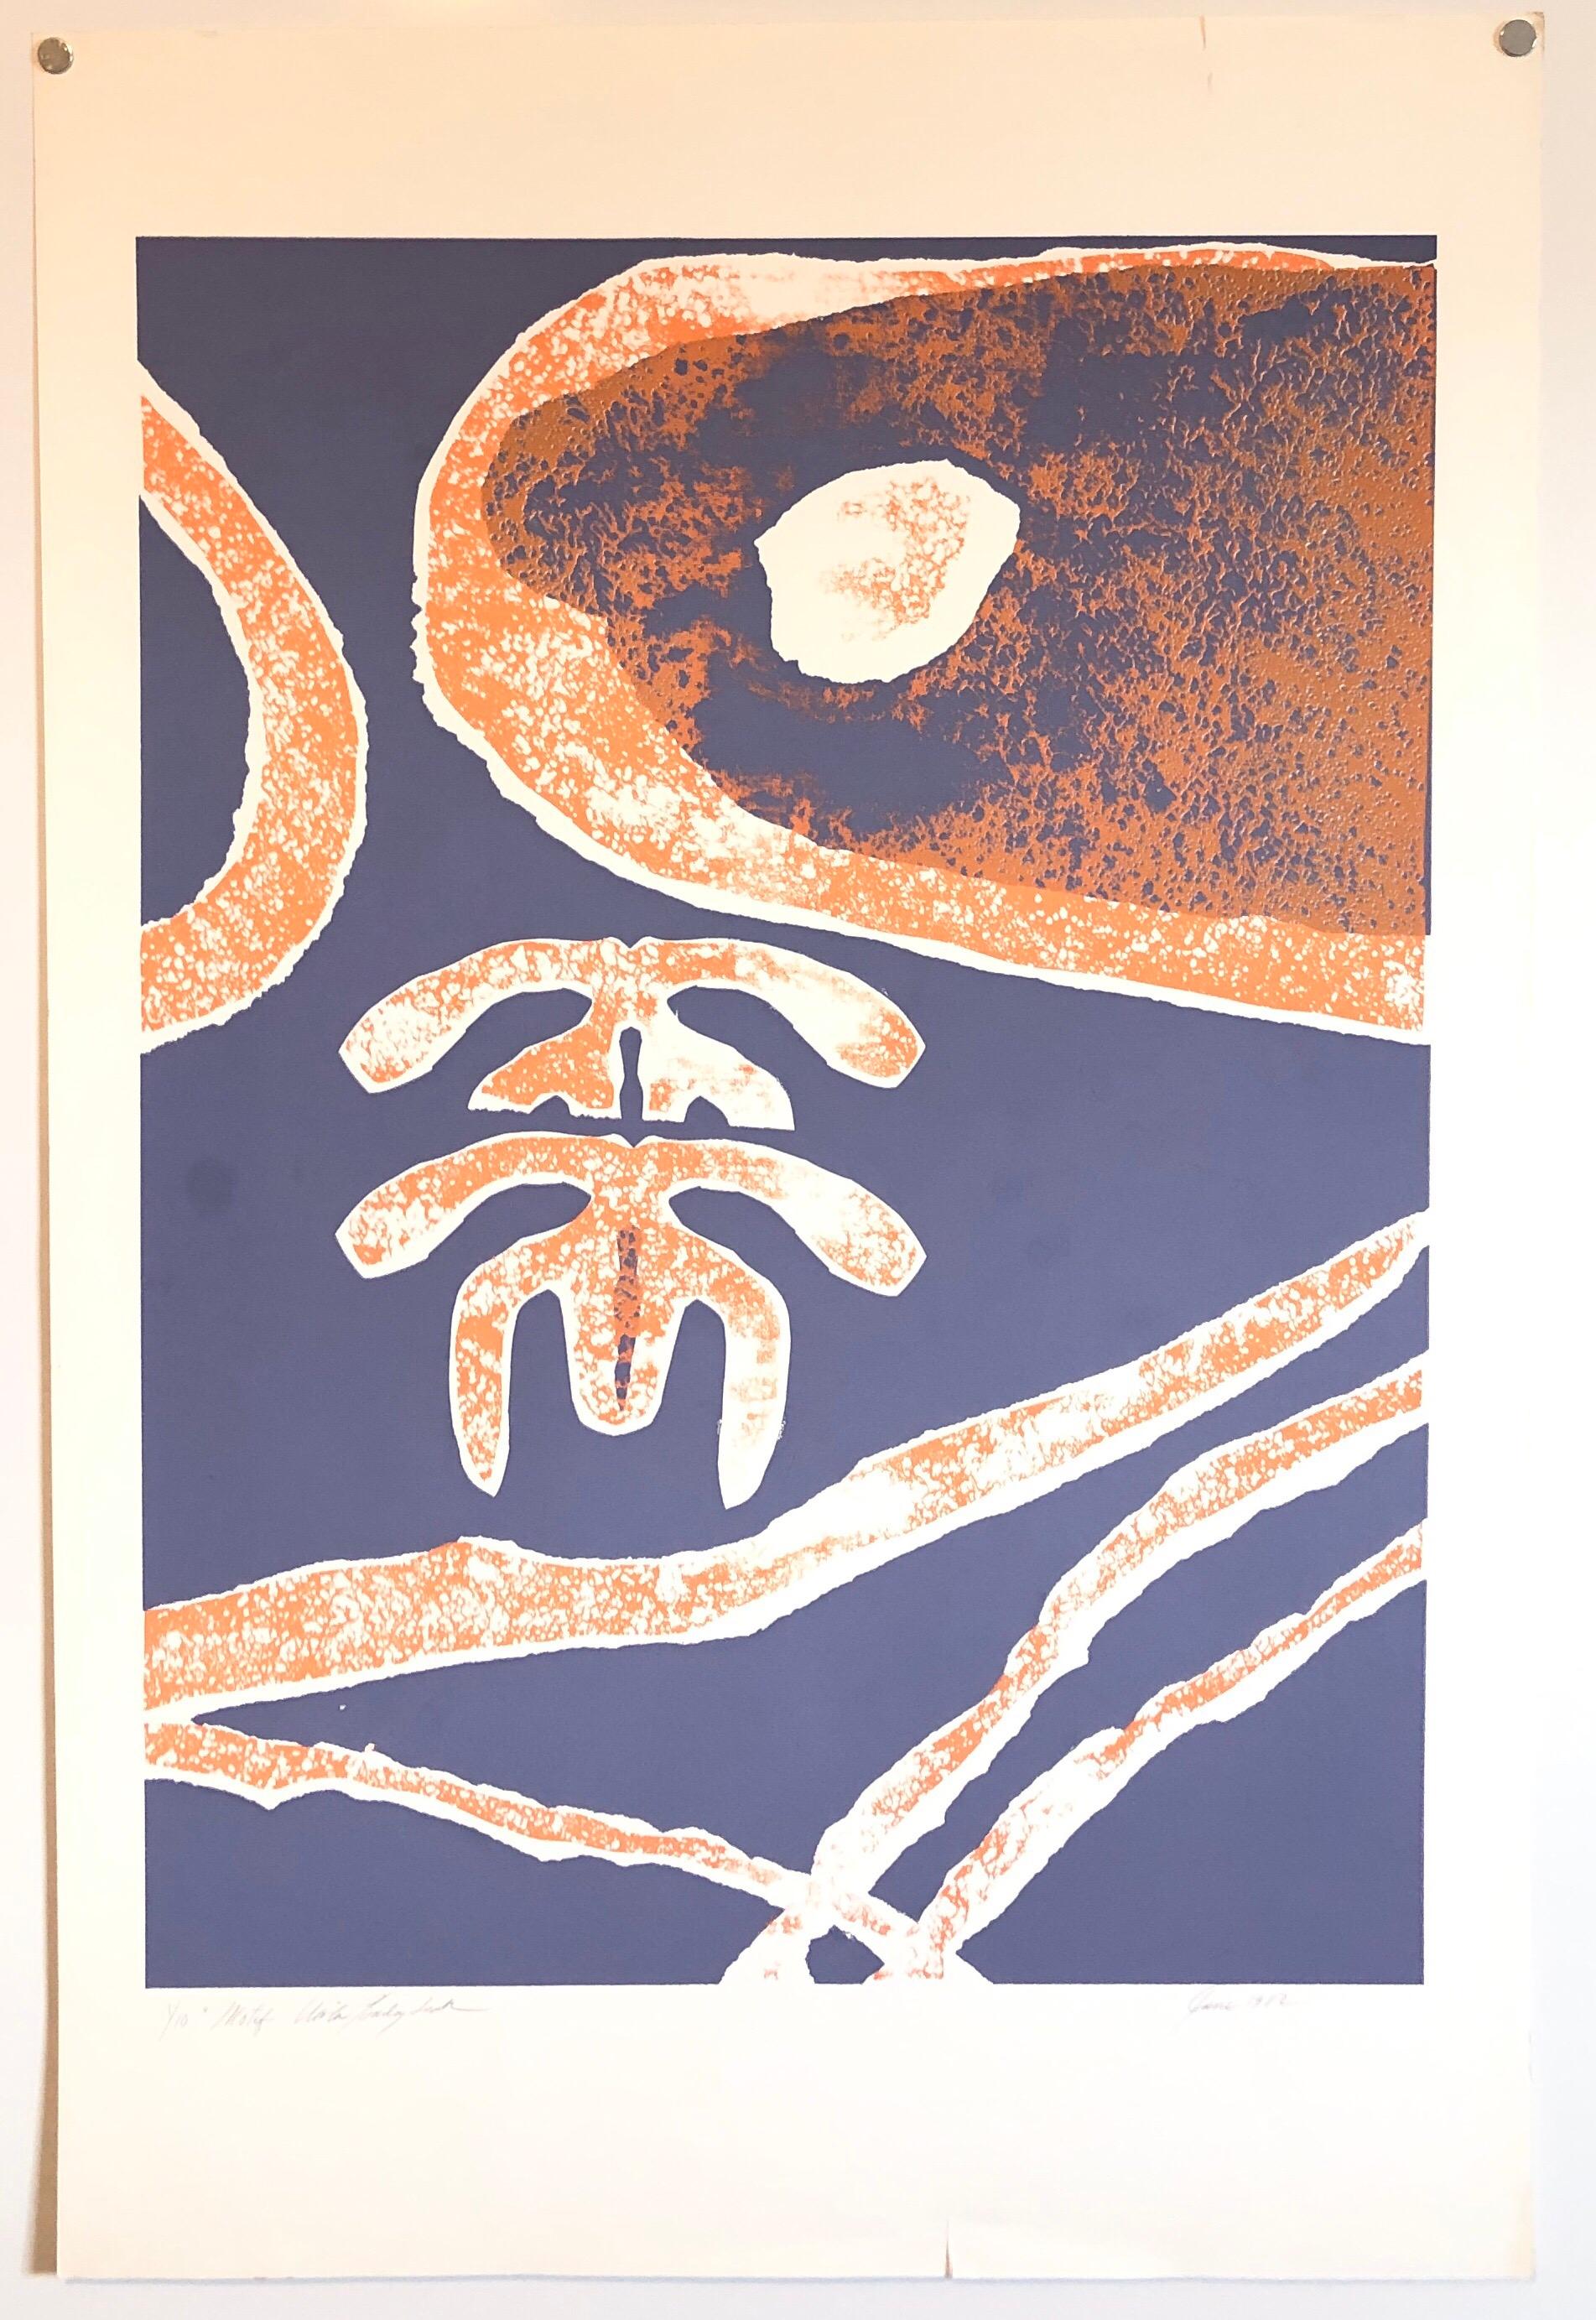 Motif (Abstract) in orange and blue abstract.
From the small edition of 10. from 1982. I am not sure if this is a woodcut or woodblock print or a silkscreen screenprint or some combination. 

Viola Burley Leak, American (1944 - )
Viola Leak was born